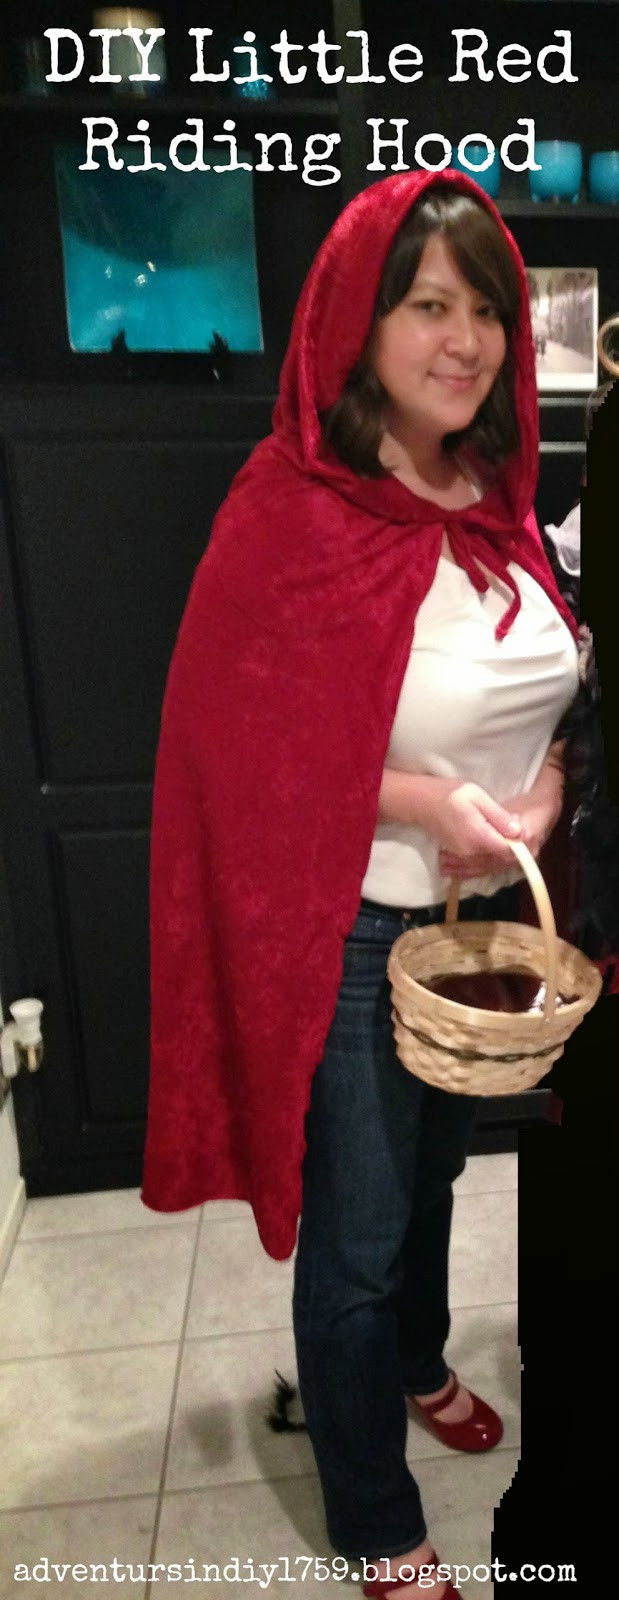 DIY Little Red Riding Hood Costume For Adults
 Adventures in DIY DIY Little Red Riding Hood Costume